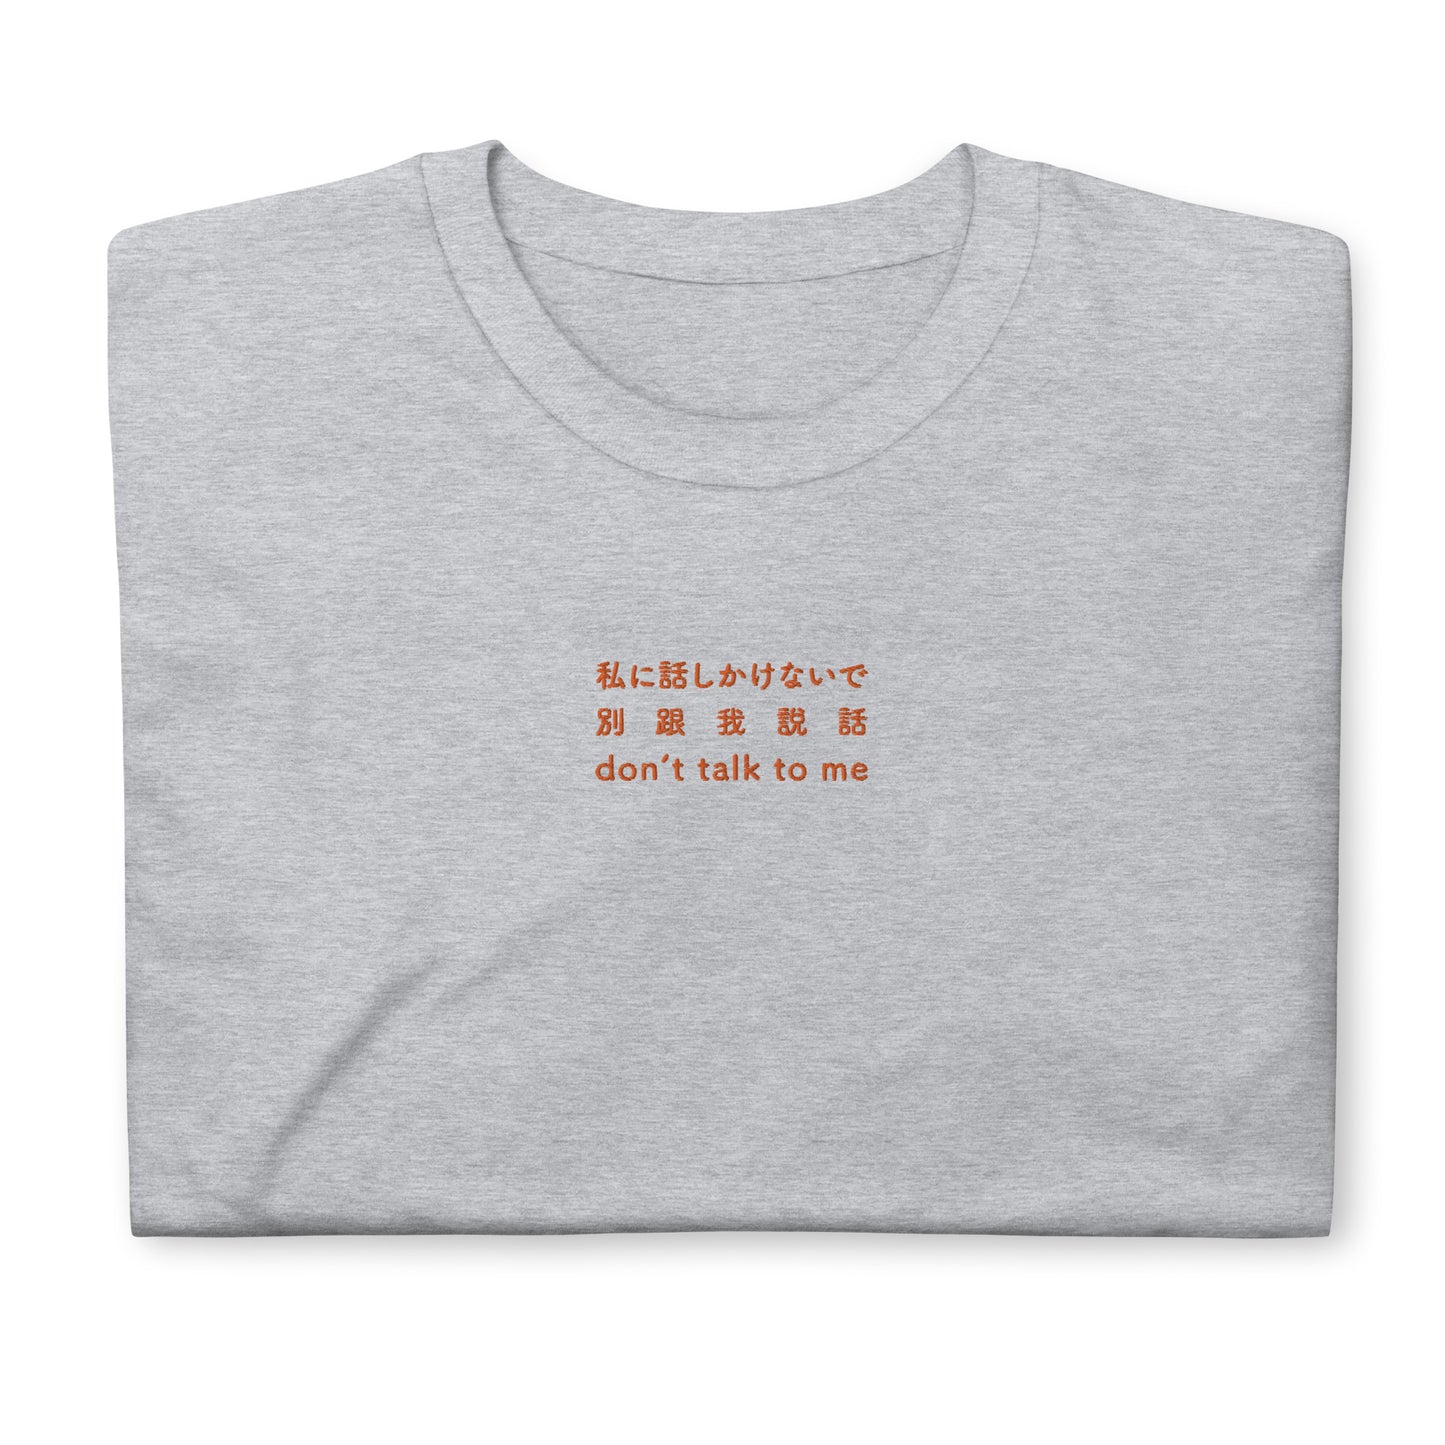 Light Gray High Quality Tee - Front Design with an Orange Embroidery "don't talk to me" in Japanese,Chinese and English